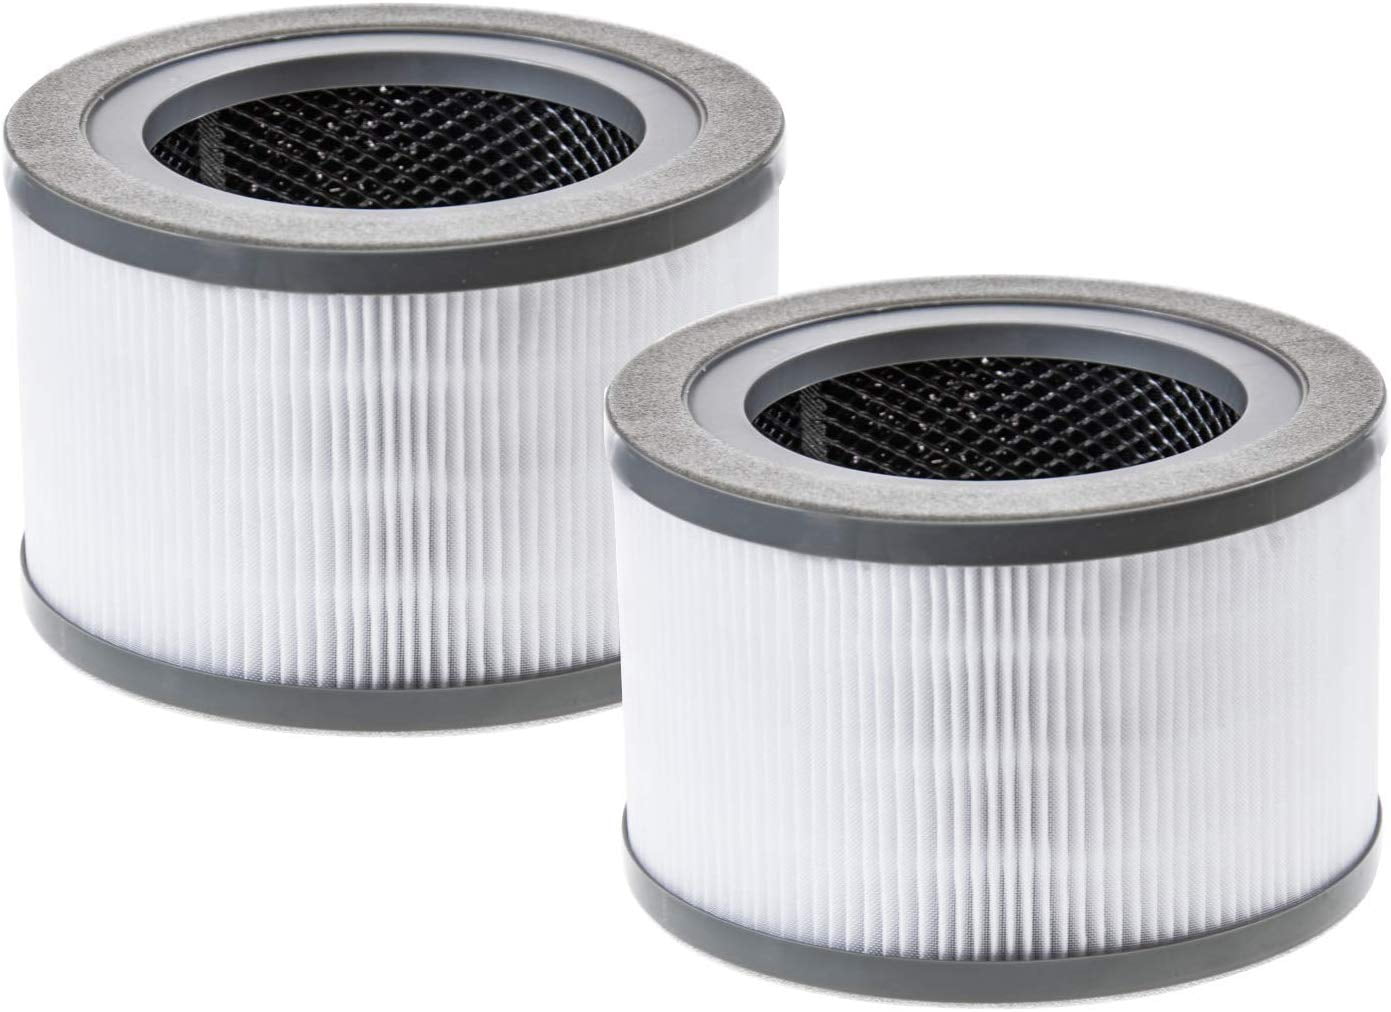 2 Packs 200 Air Purifier Replacement Filter for Levoit Vista,Vista 200 Replacement Filter Compatible with Levoit Vista 200-Rf Air Purifier 